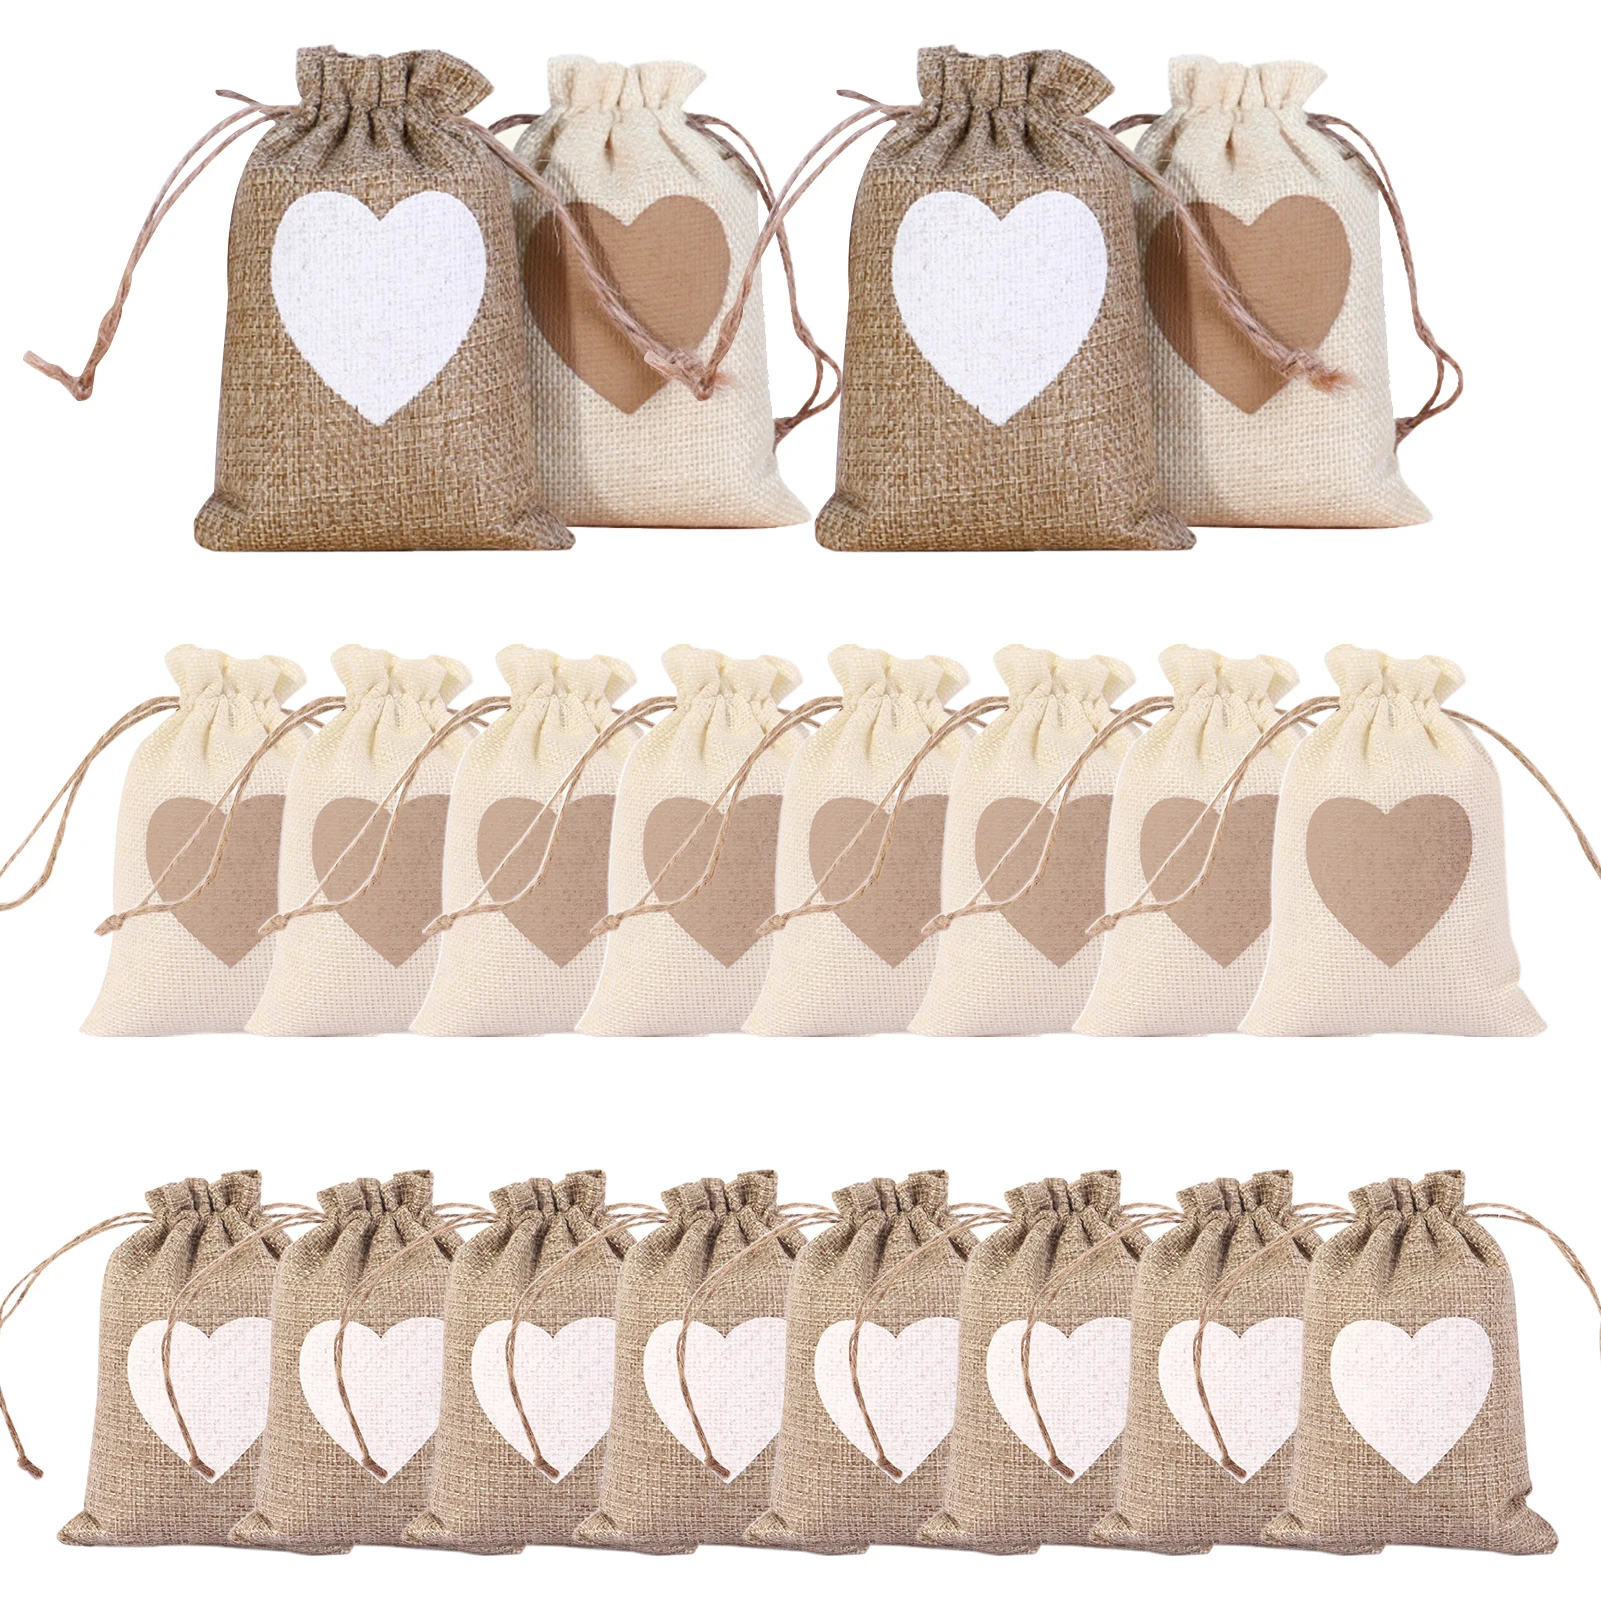 

20pcs Party With Drawstring Burlap Bag Jewelry Storage 10x14cm Wedding Heart Pattern Sachet Candy Christmas Gift Pouch Craft